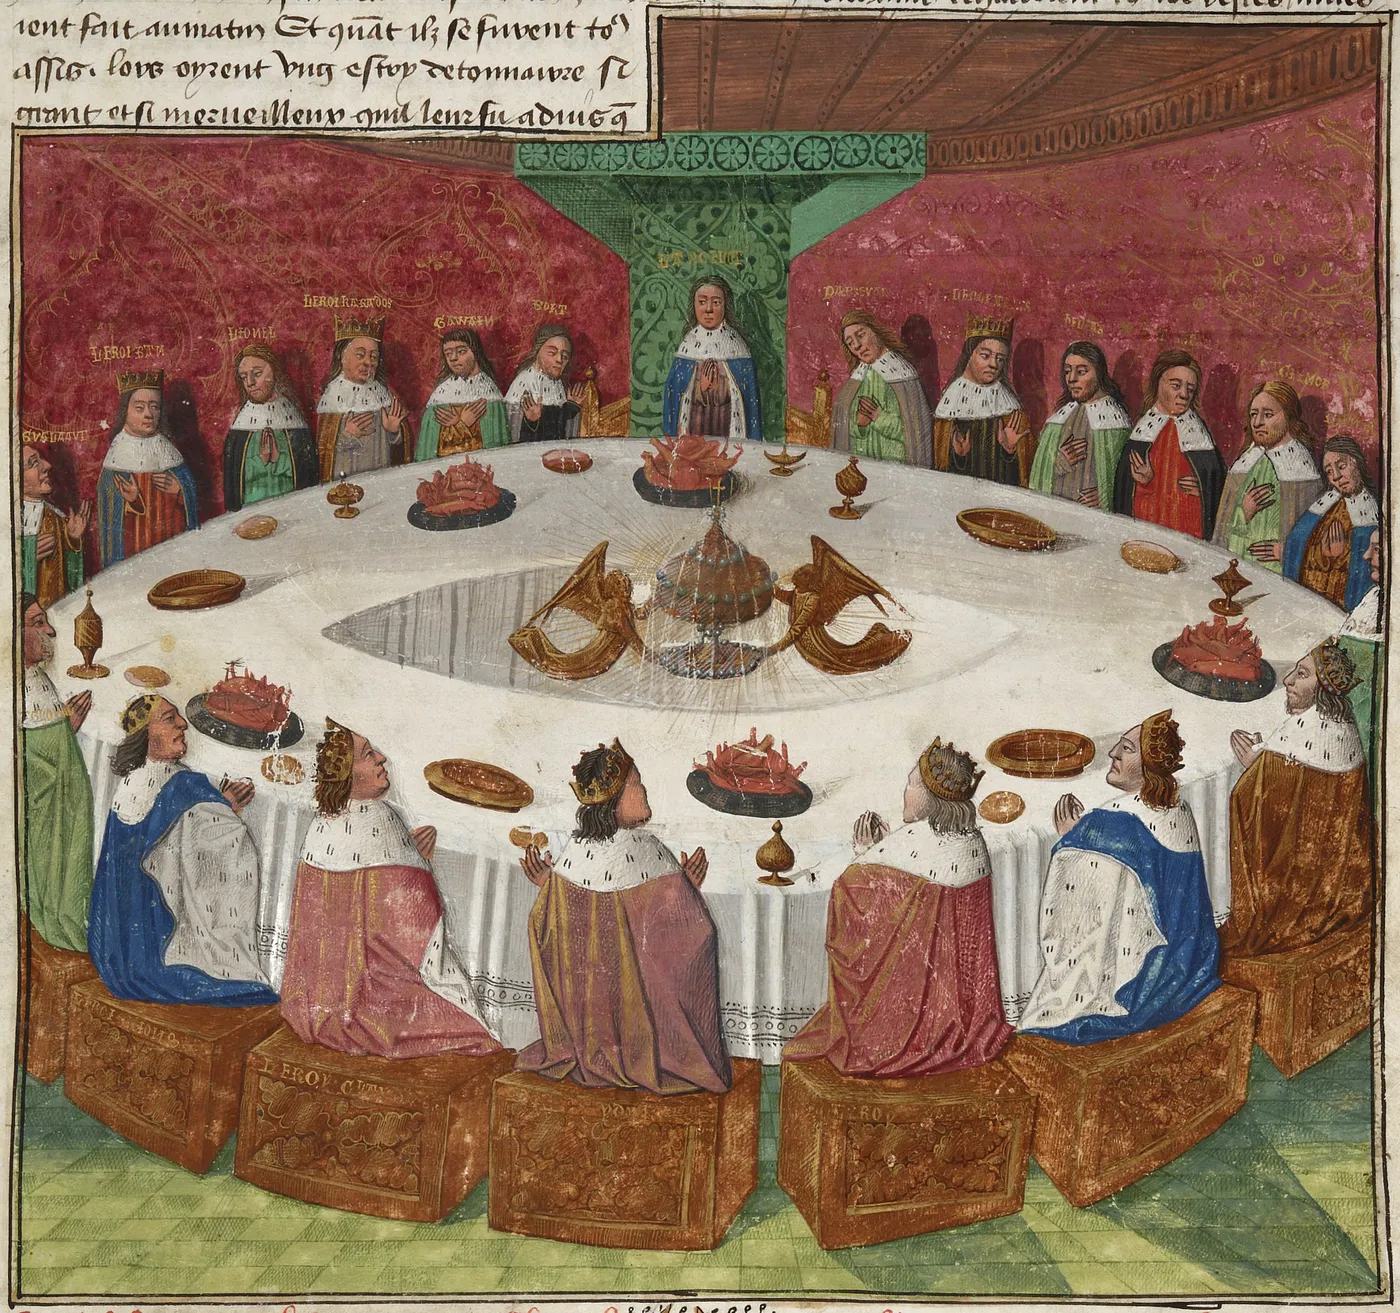 An illustration from the 13th century Lancelot-Grail, depicting King Arthur’s round table which has no head, implying that everyone who sits there has equal status